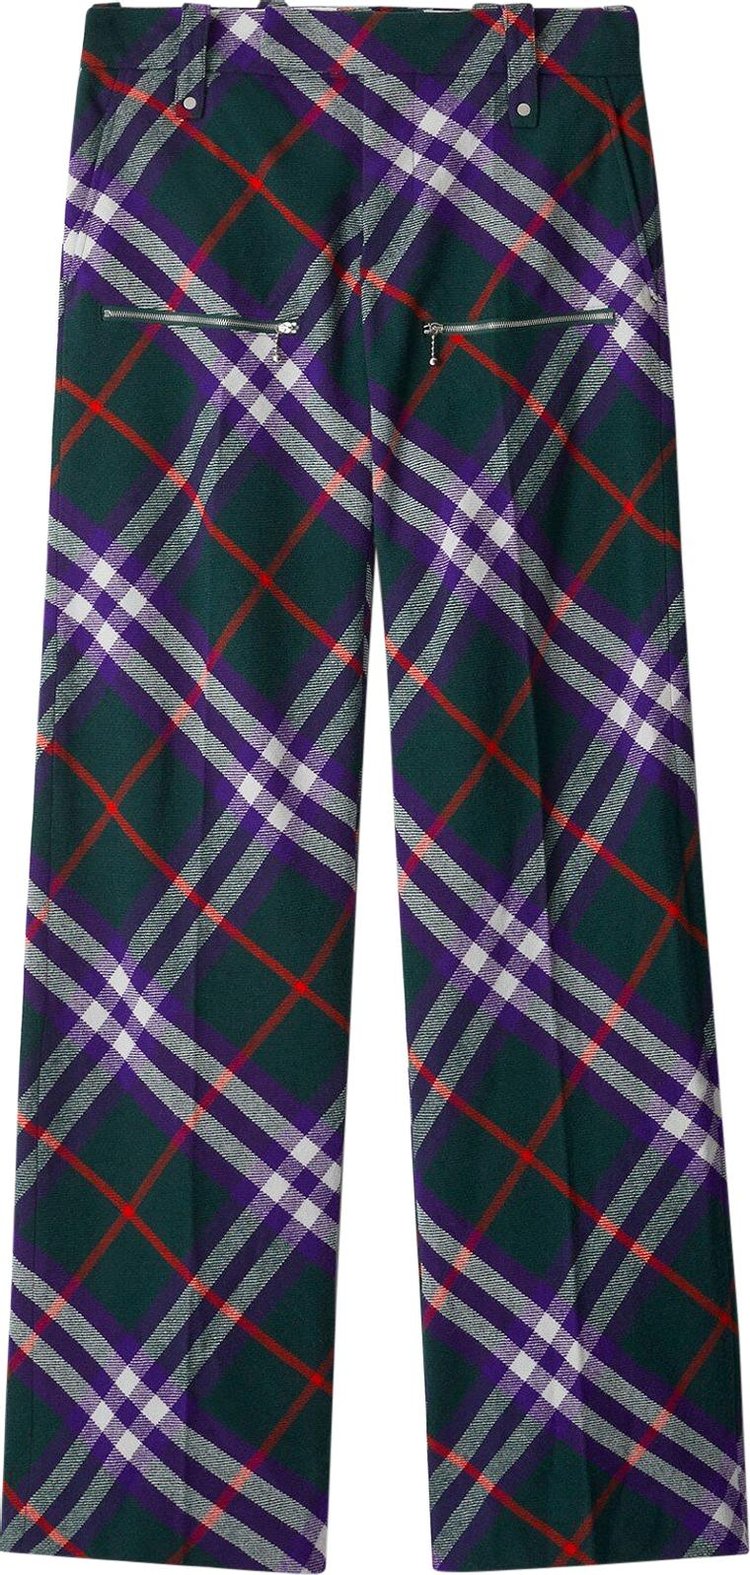 Burberry Check Wool Trousers 'Vine'